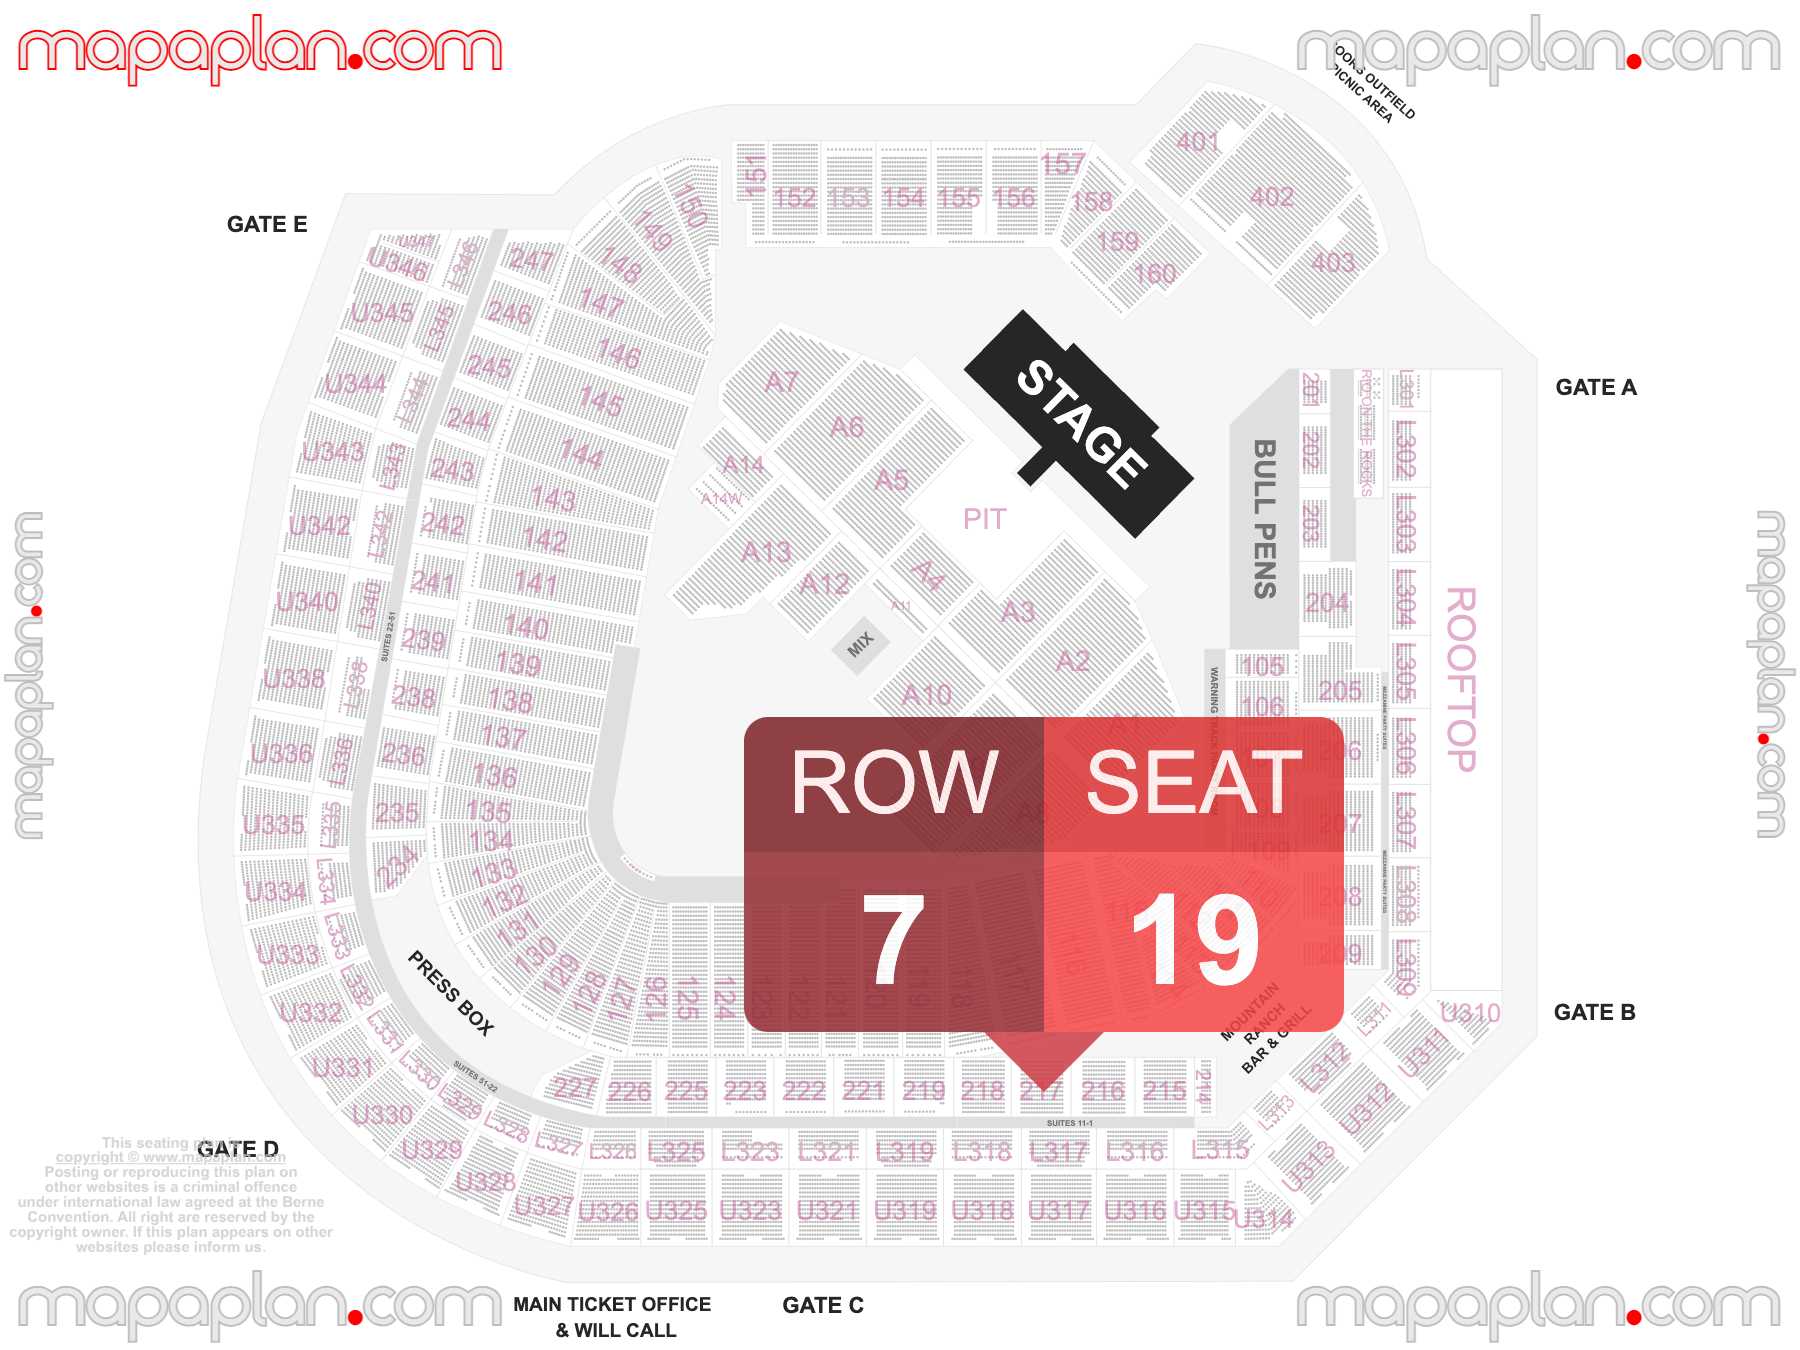 Denver Coors Field seating chart Concert & Colorado Rockies Stadium Baseball detailed seat numbers and row numbering chart with interactive map plan layout